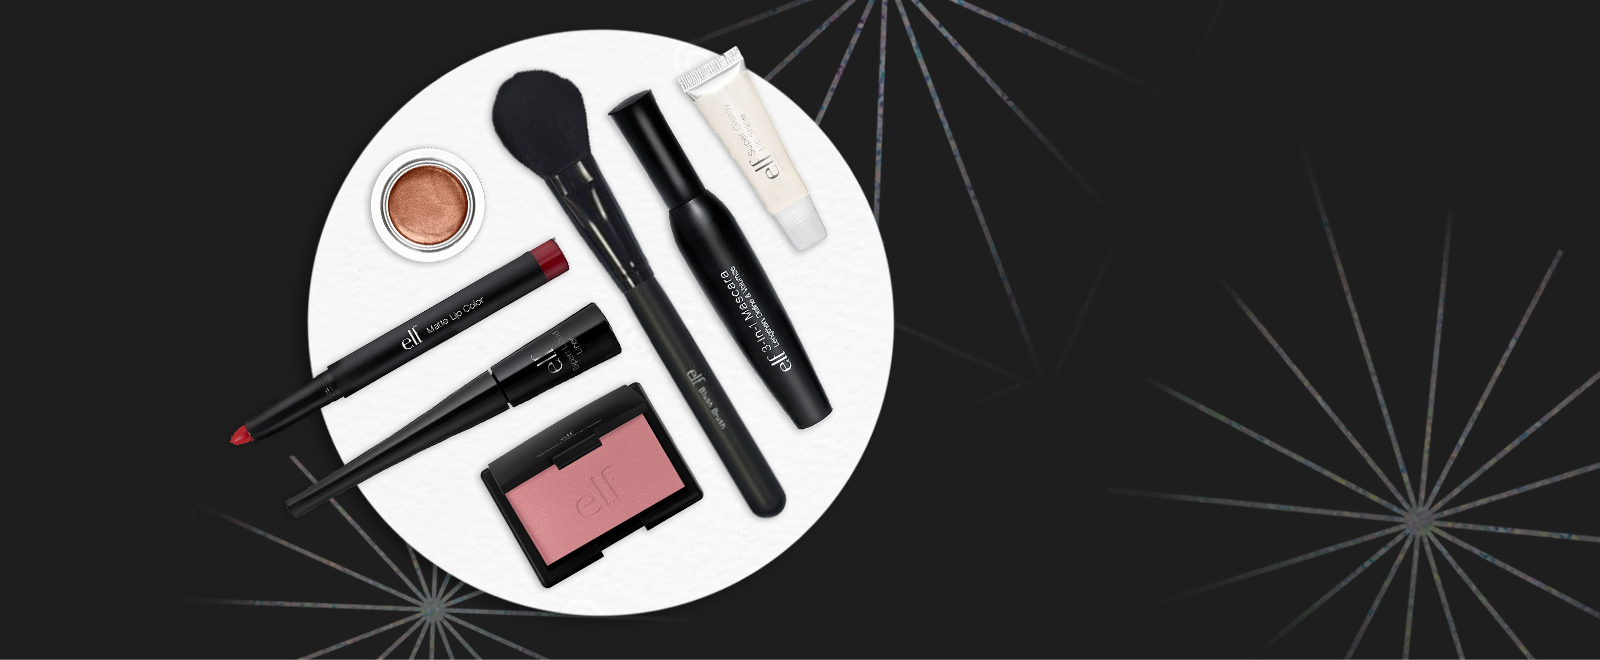 FREE Shipping on All Orders + FREE 7-pc Beauty Stash w/$25 at e.l.f.!